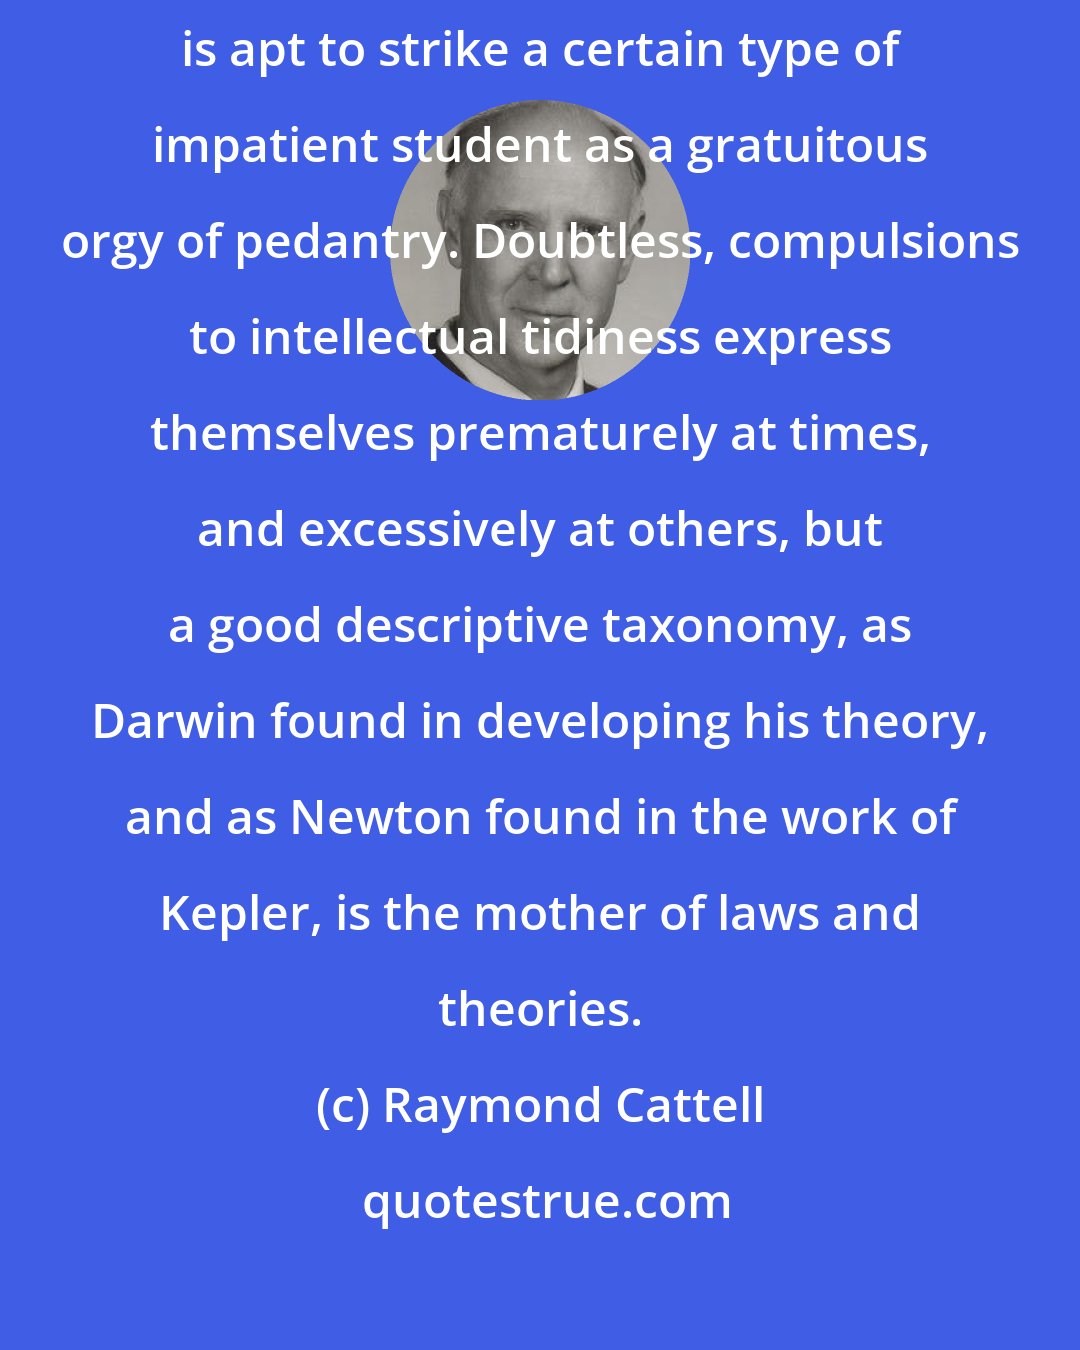 Raymond Cattell: A taxonomy of abilities, like a taxonomy anywhere else in science, is apt to strike a certain type of impatient student as a gratuitous orgy of pedantry. Doubtless, compulsions to intellectual tidiness express themselves prematurely at times, and excessively at others, but a good descriptive taxonomy, as Darwin found in developing his theory, and as Newton found in the work of Kepler, is the mother of laws and theories.